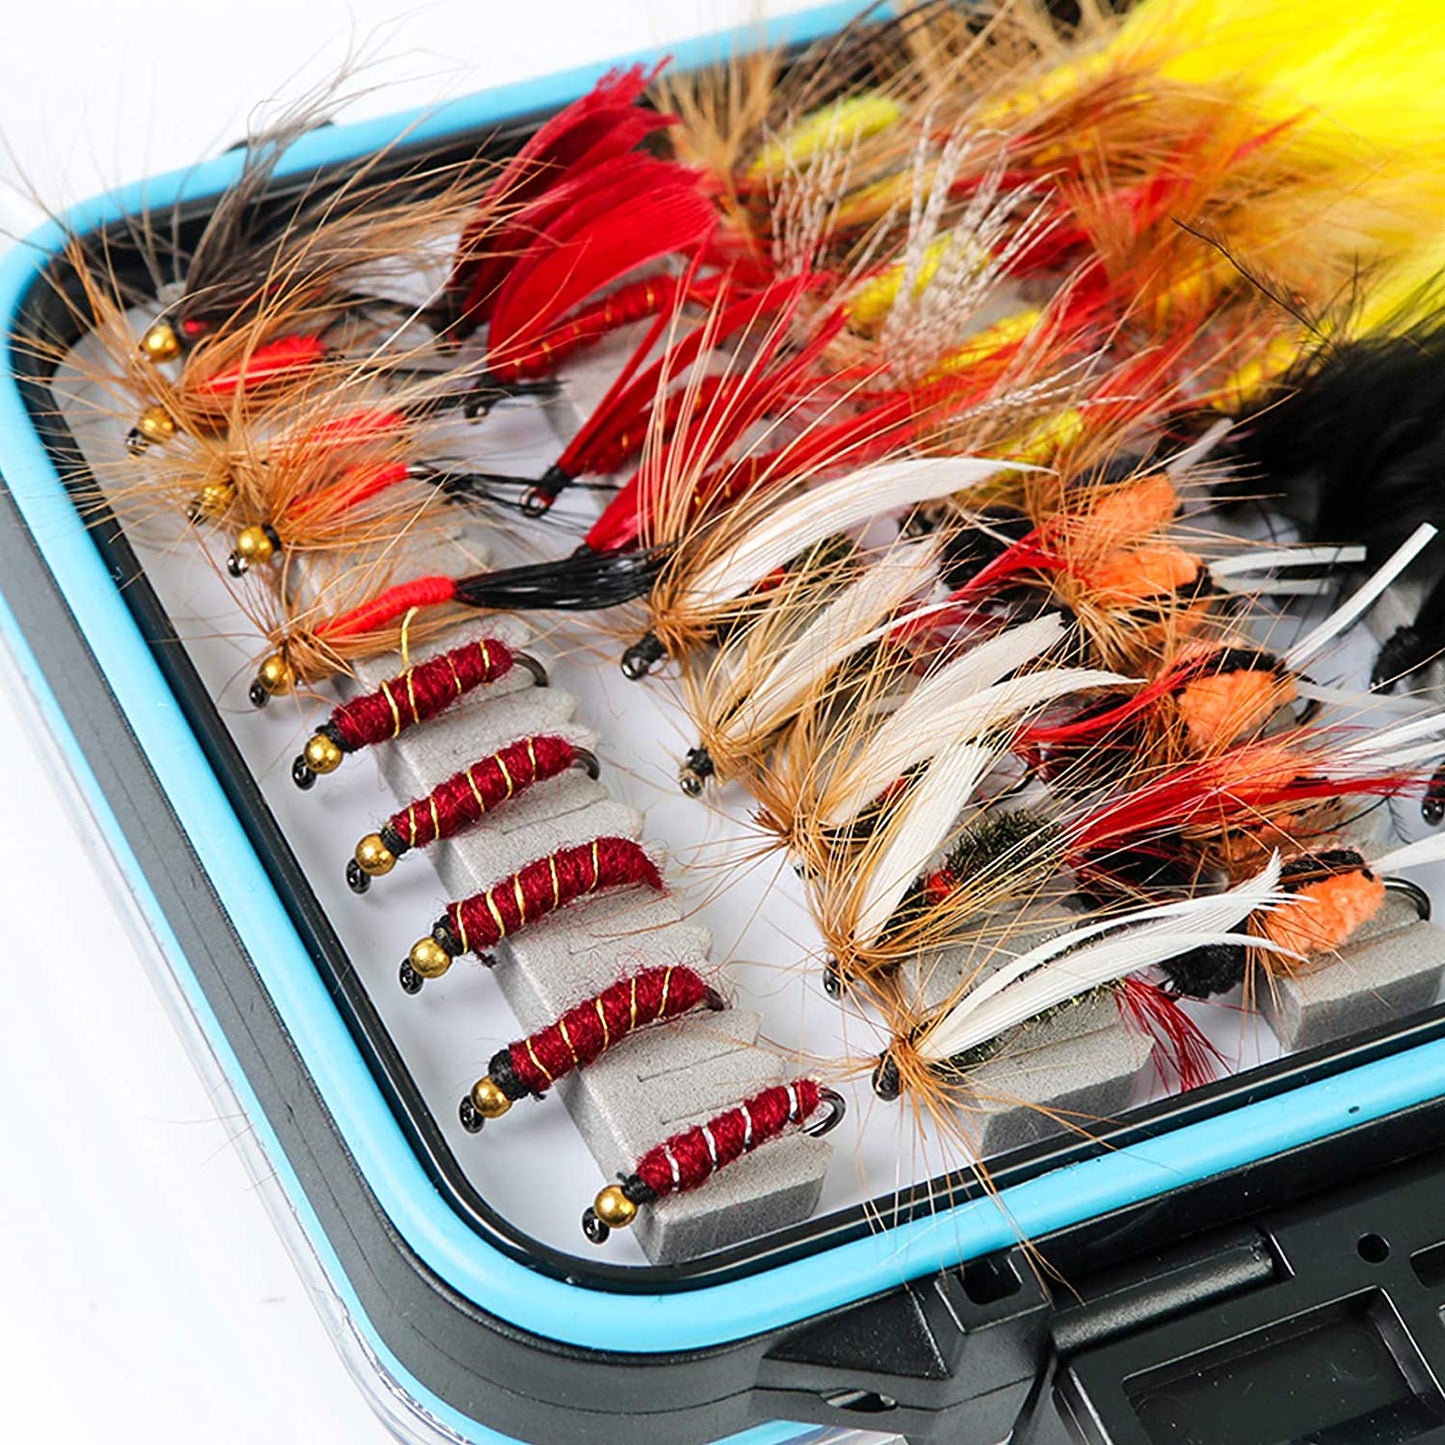 120 Fly Assortment w/ Case